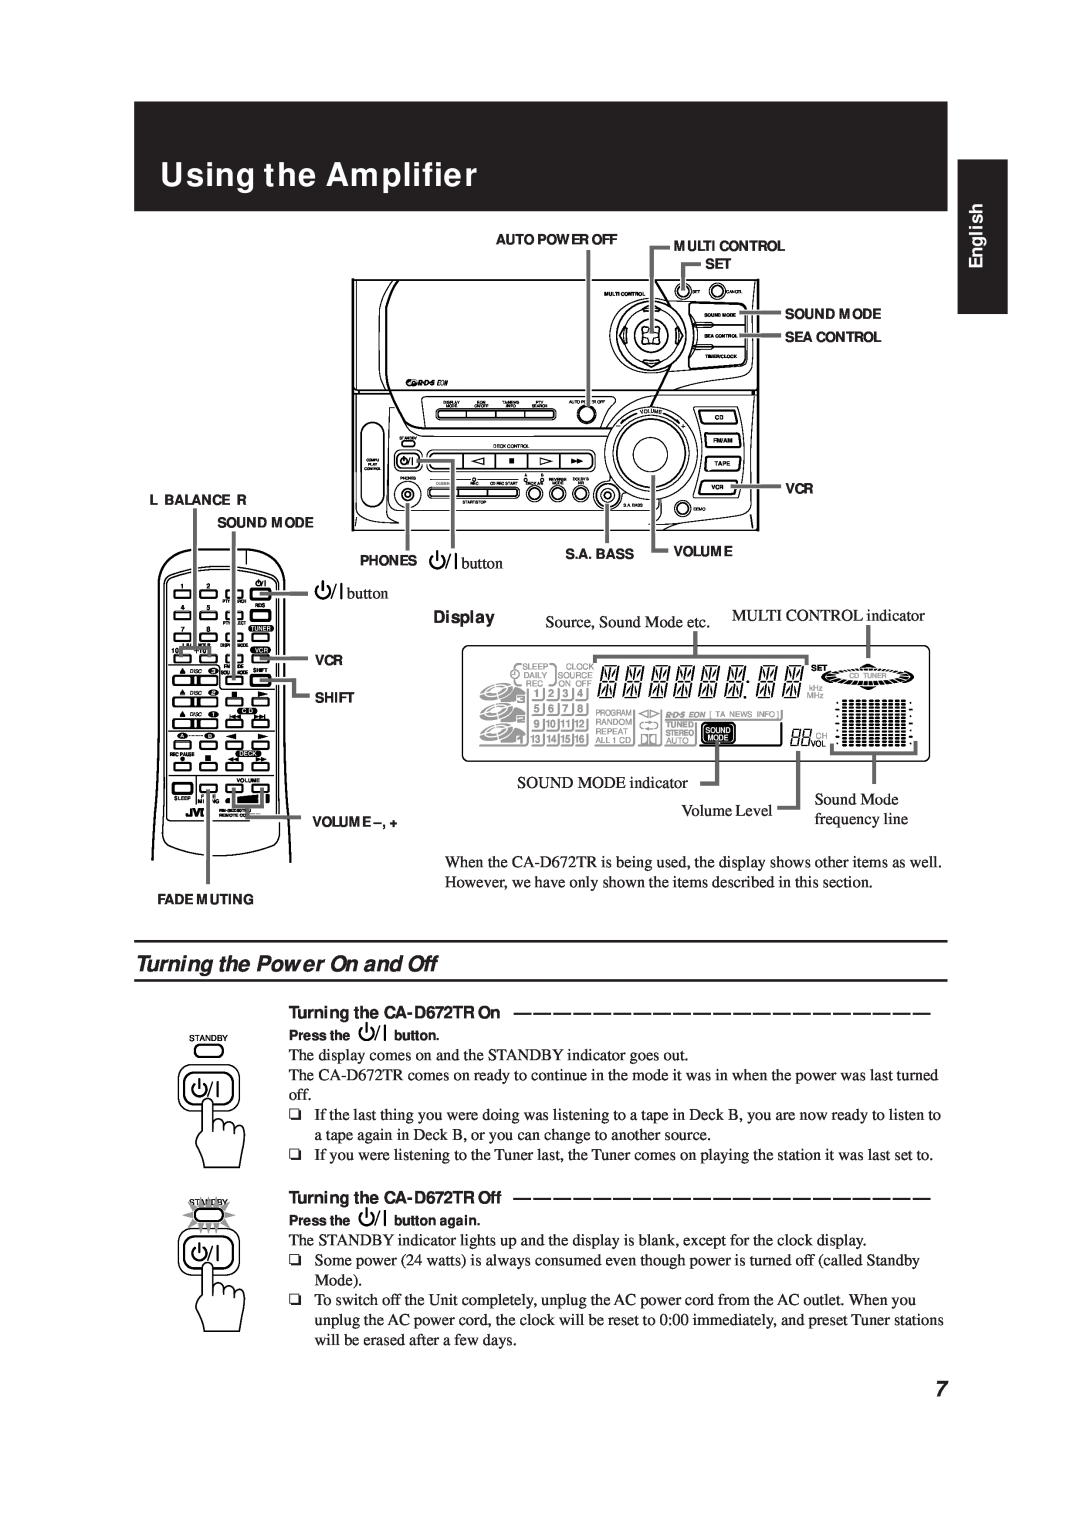 JVC manual Using the Amplifier, Turning the Power On and Off, Display, Turning the CA-D672TROn, Turning the CA-D672TROff 